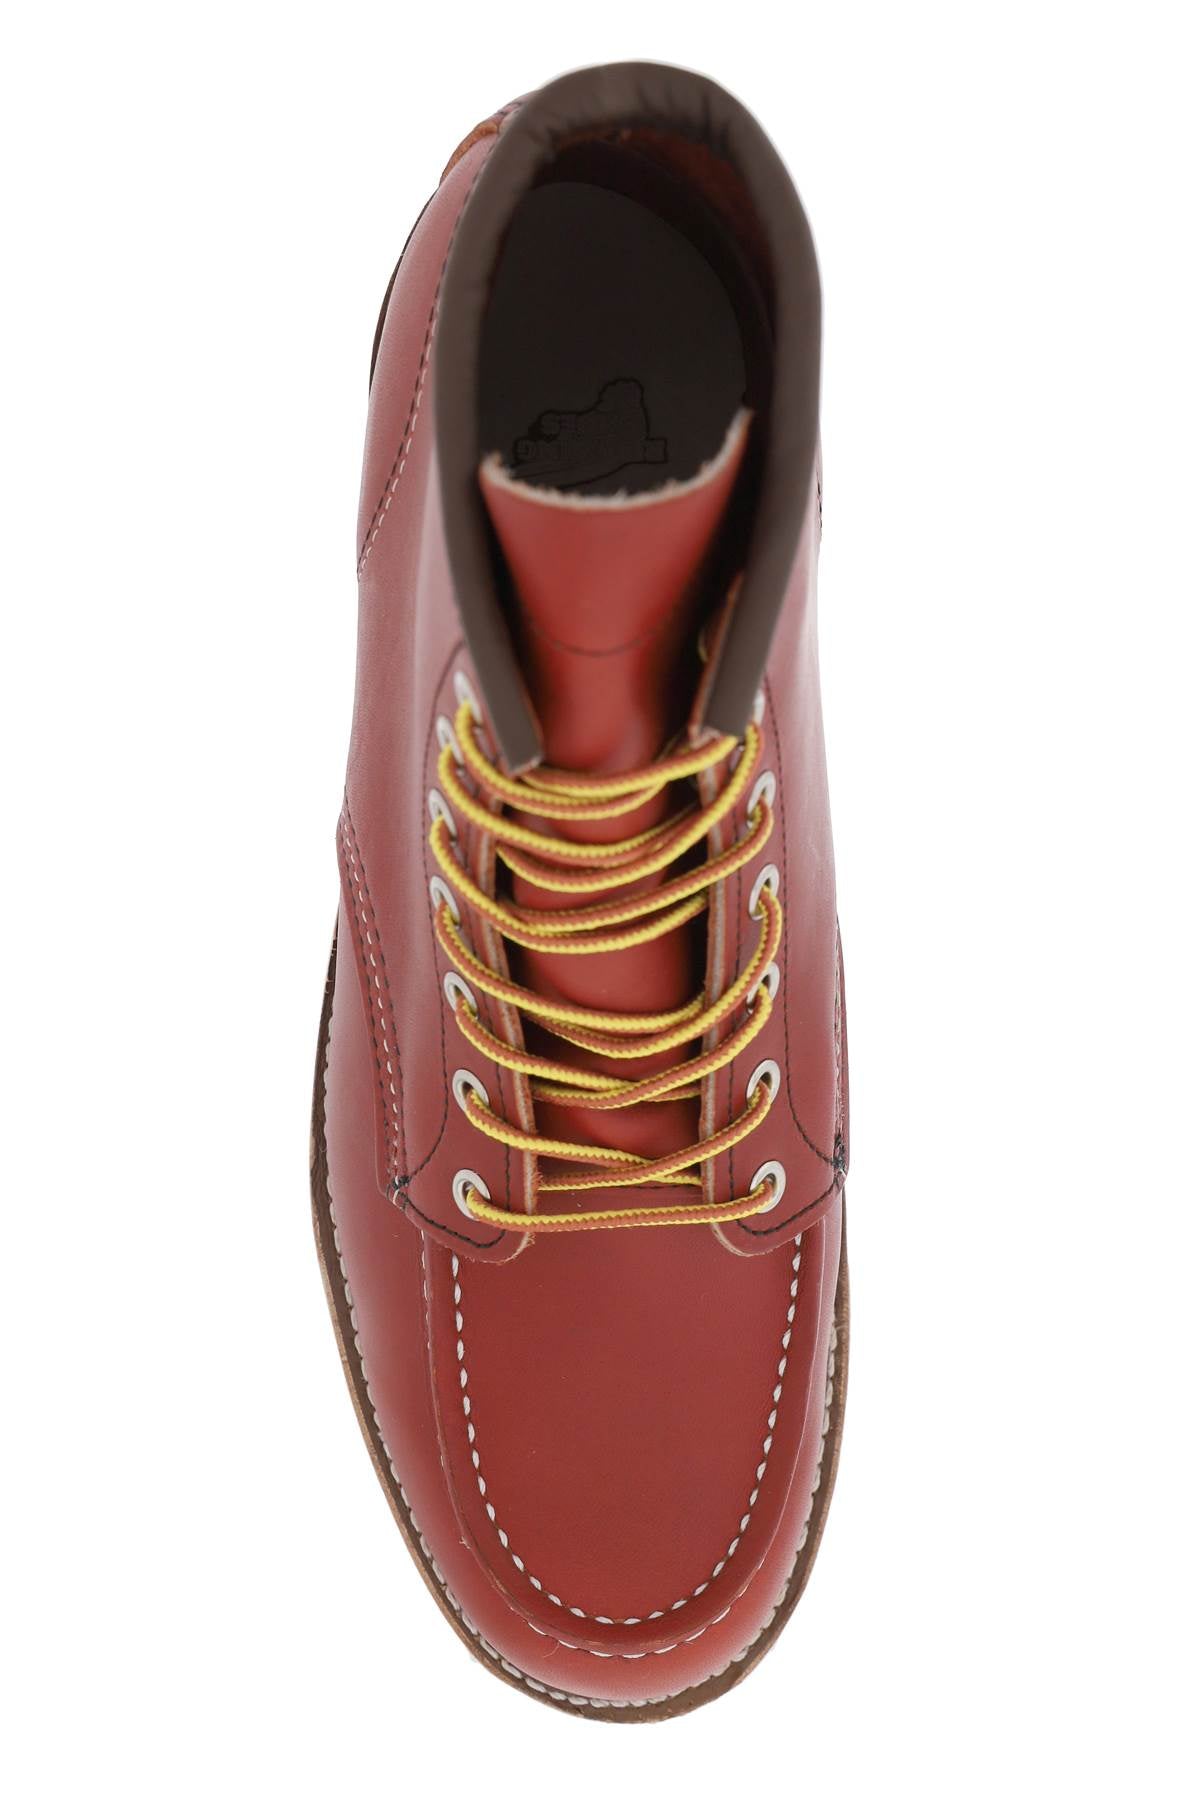 Red Wing Shoes Classic Moc Ankle Boots   Red